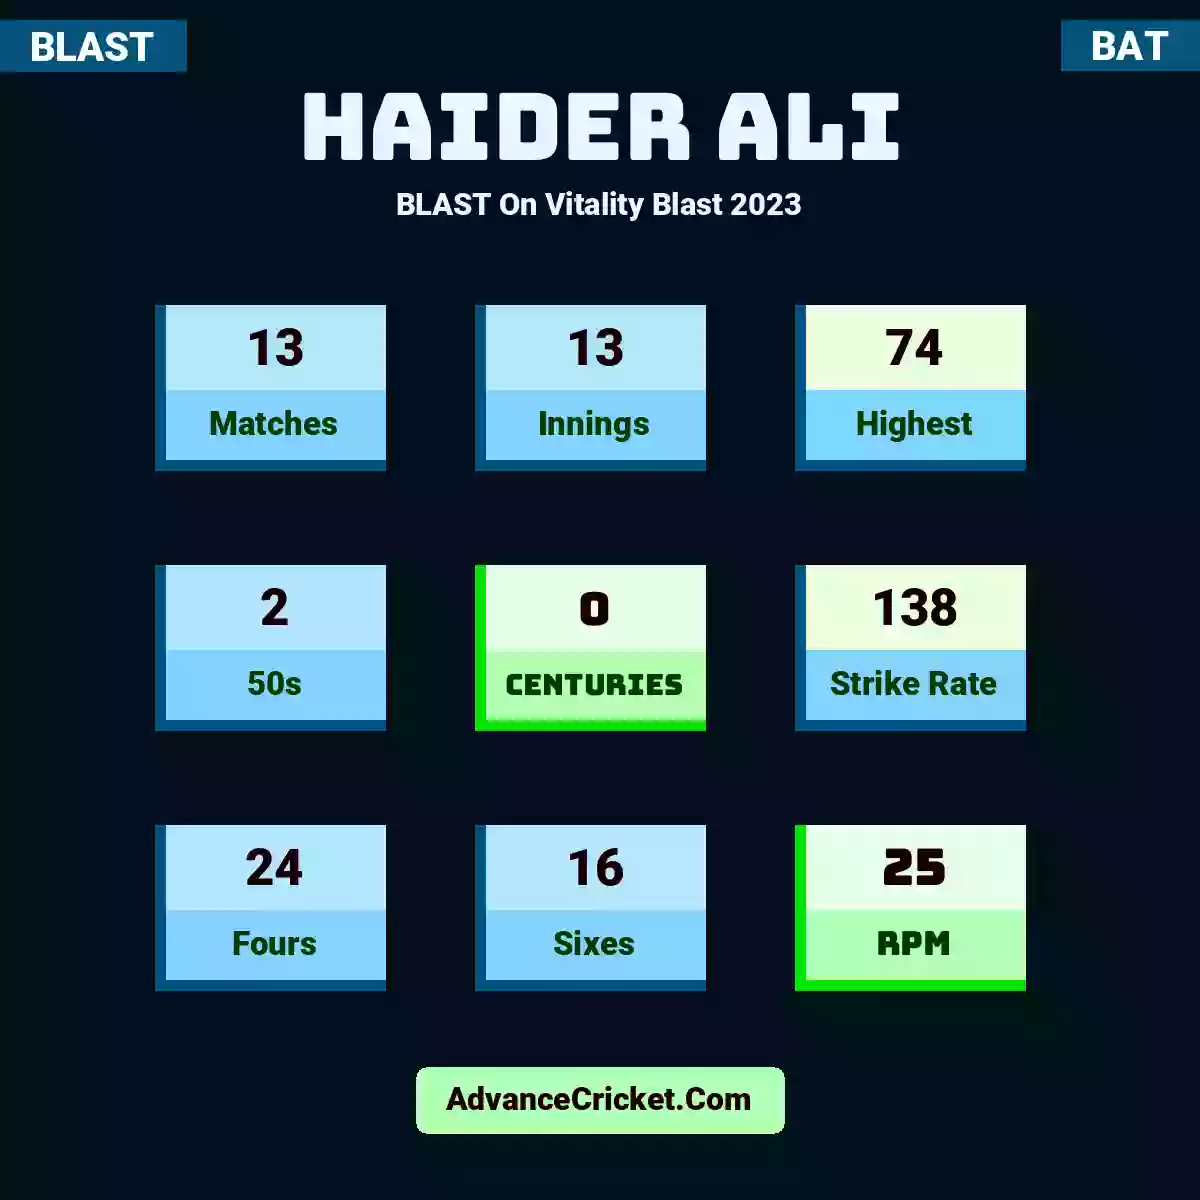 Haider Ali BLAST  On Vitality Blast 2023, Haider Ali played 13 matches, scored 74 runs as highest, 2 half-centuries, and 0 centuries, with a strike rate of 138. H.Ali hit 24 fours and 16 sixes, with an RPM of 25.